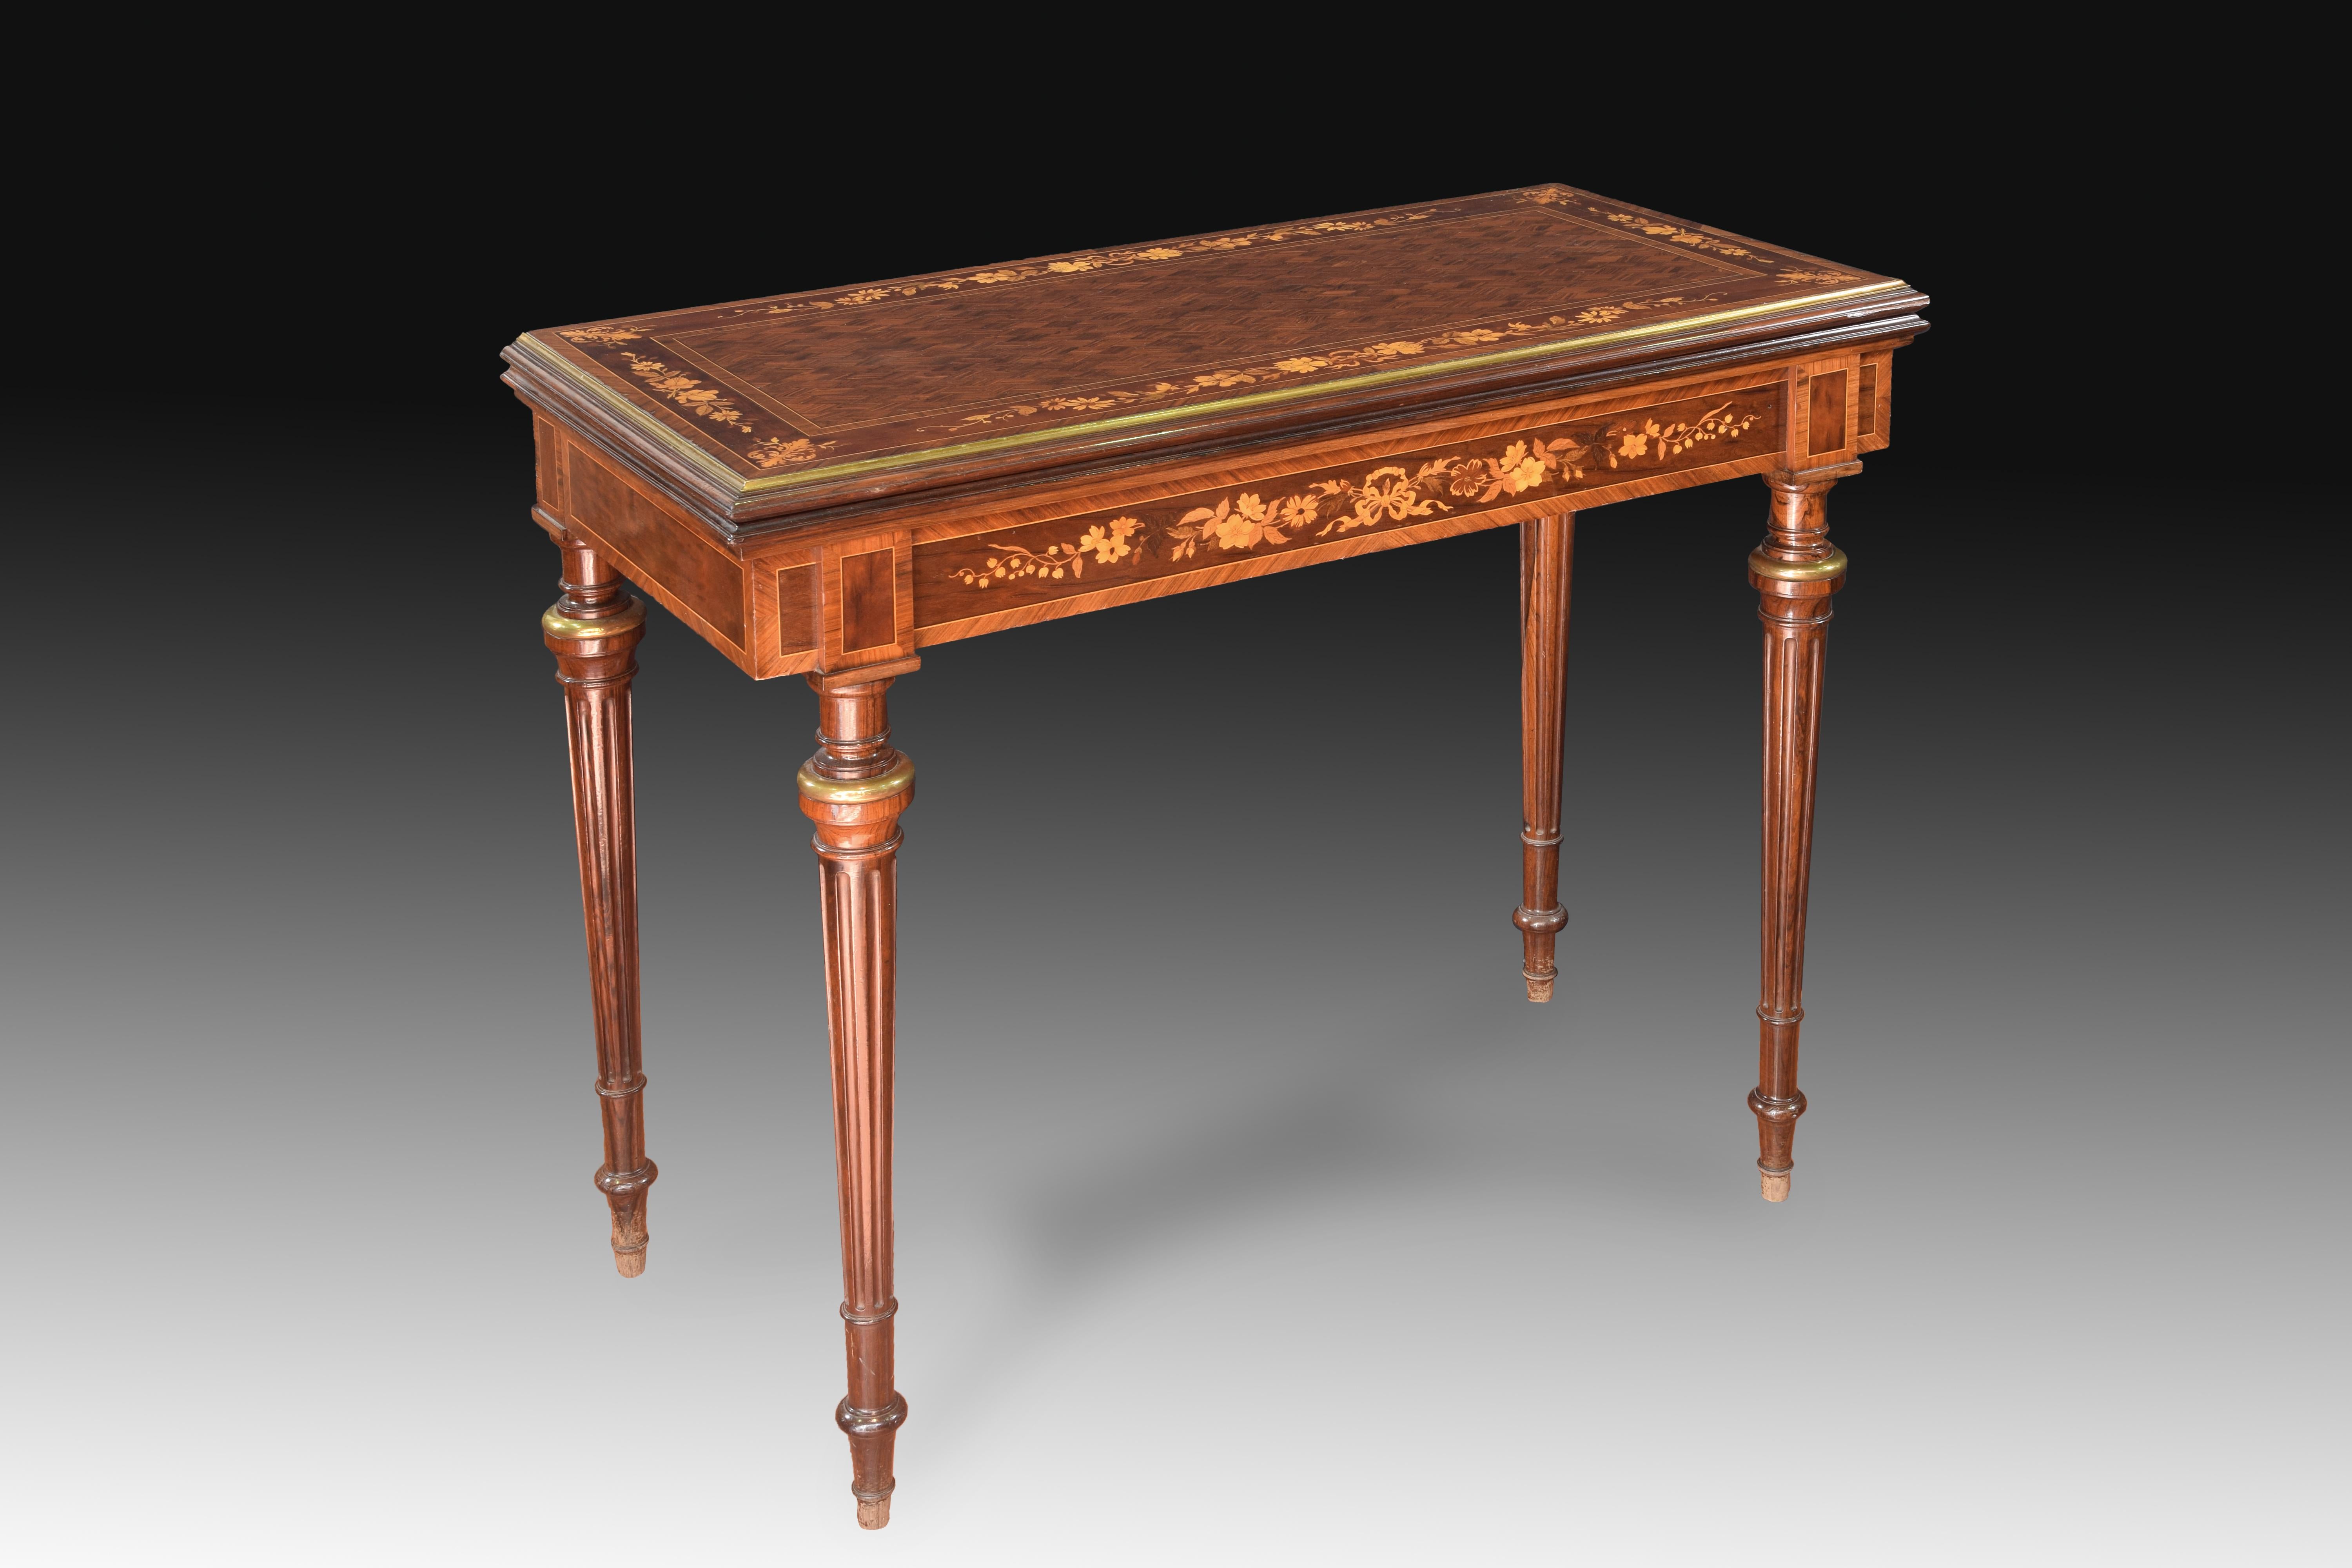 Game table with marquetry. Rosewood (palo santo), mahogany, fruit tree wood, bronze, leather, 19th century.
Table with four ribbed legs with metallic elements towards the top that has a delicate decoration in marquetry (flowers, bows, plant